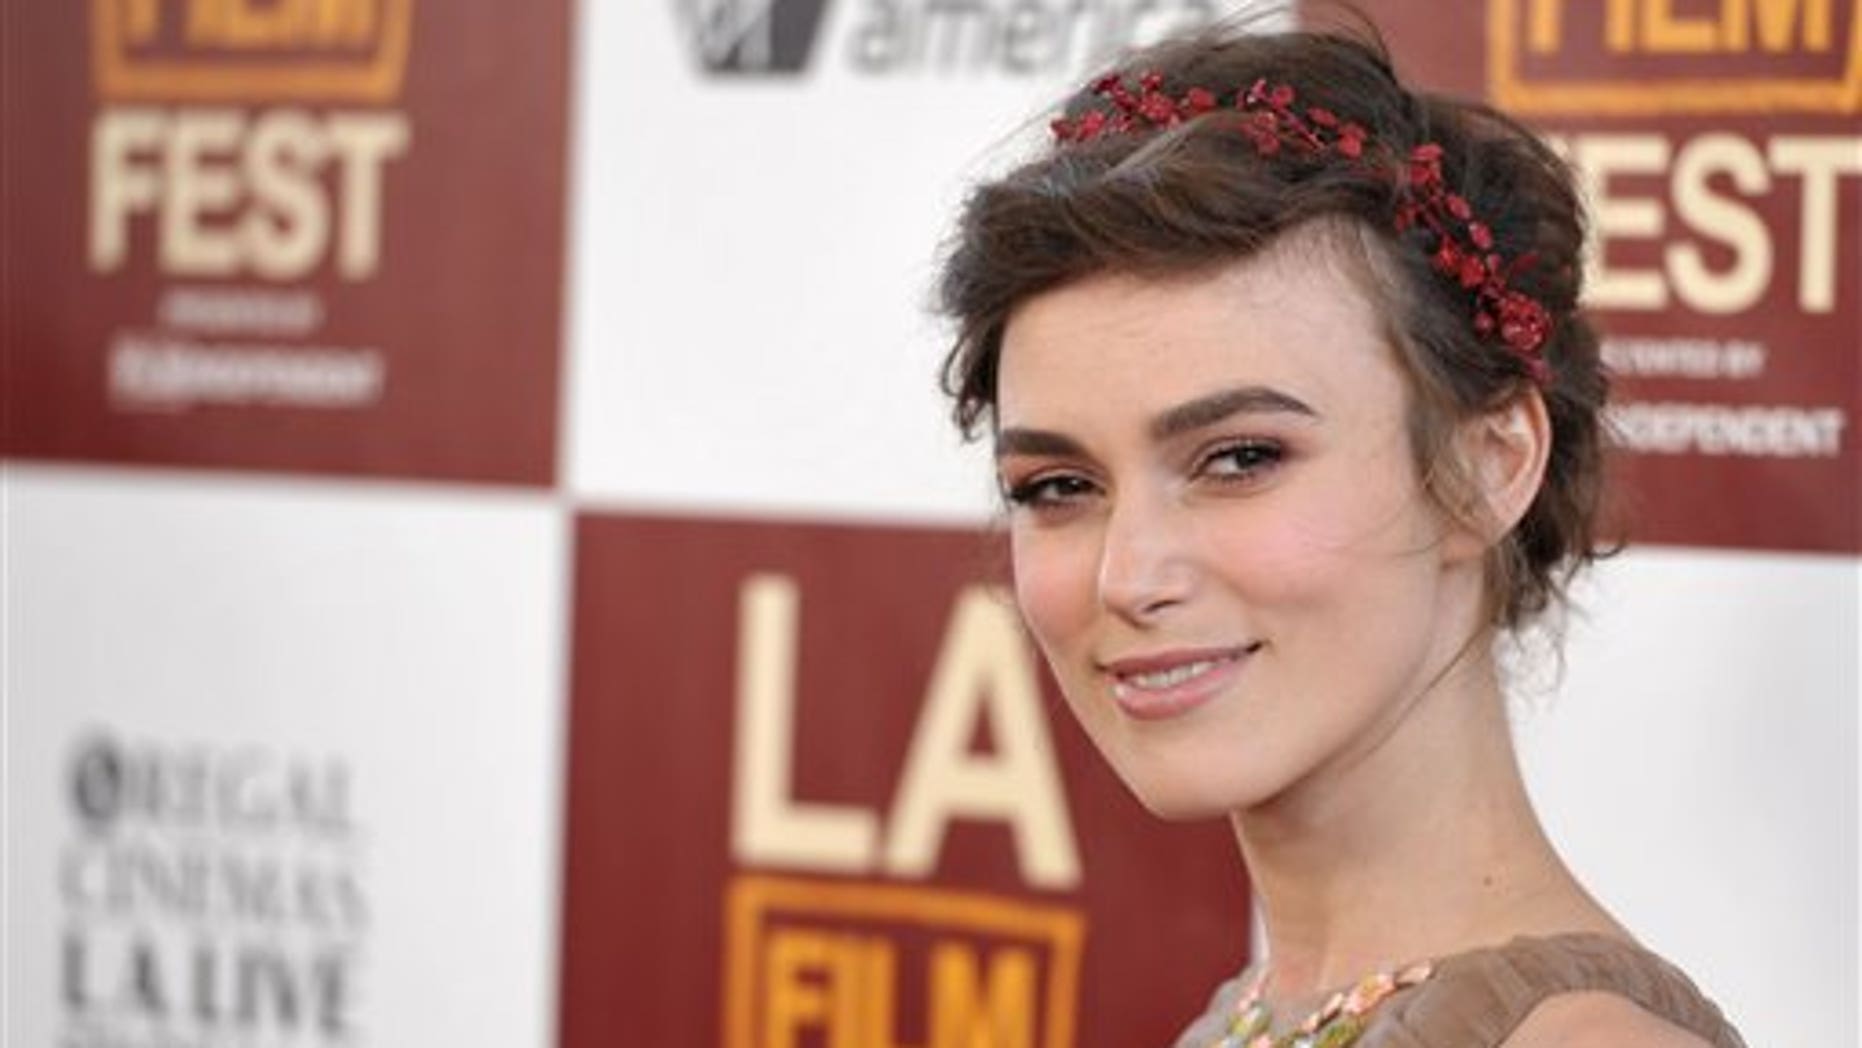 The actress Keira Knightley explained to 22 years old that she was suffering from mental depression.